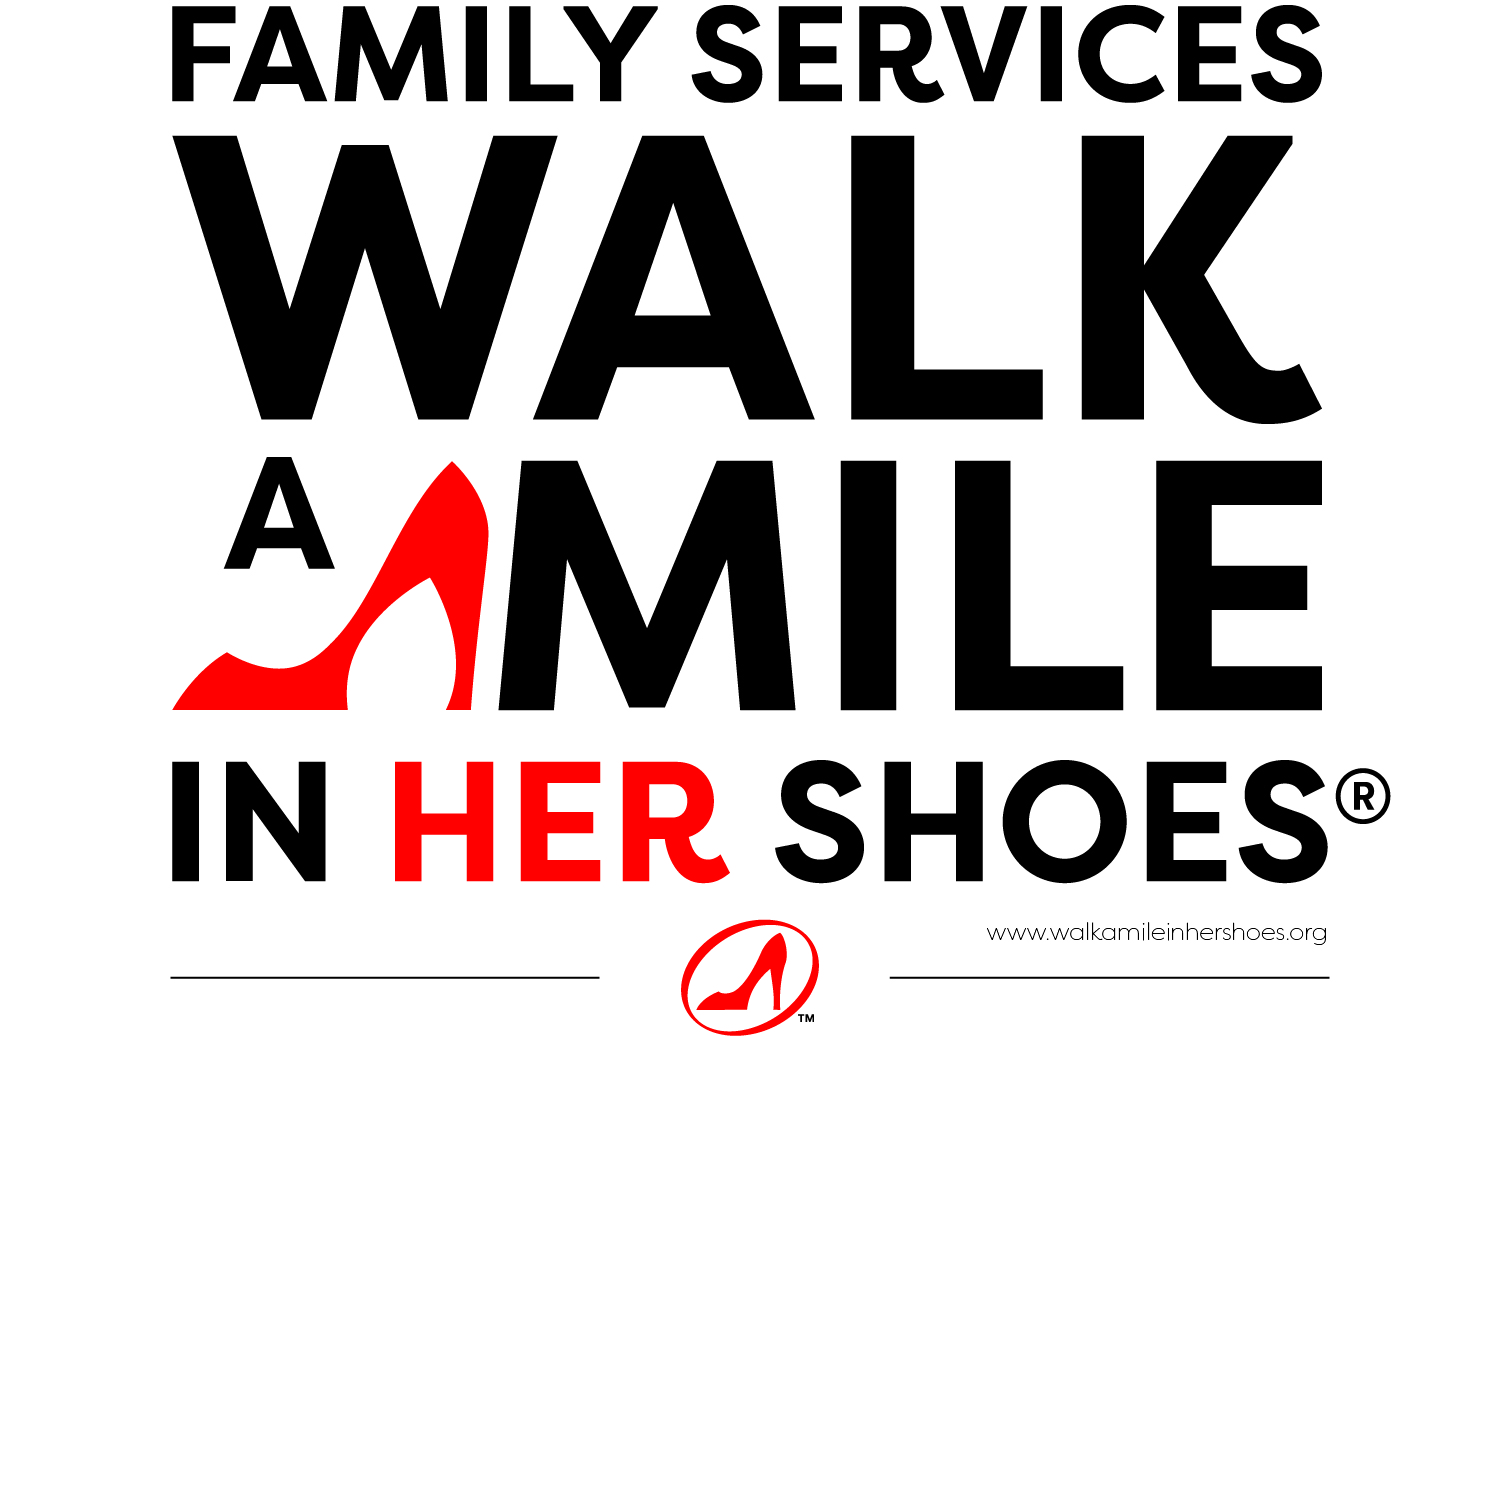 8th Annual Family Services Walk A Mile